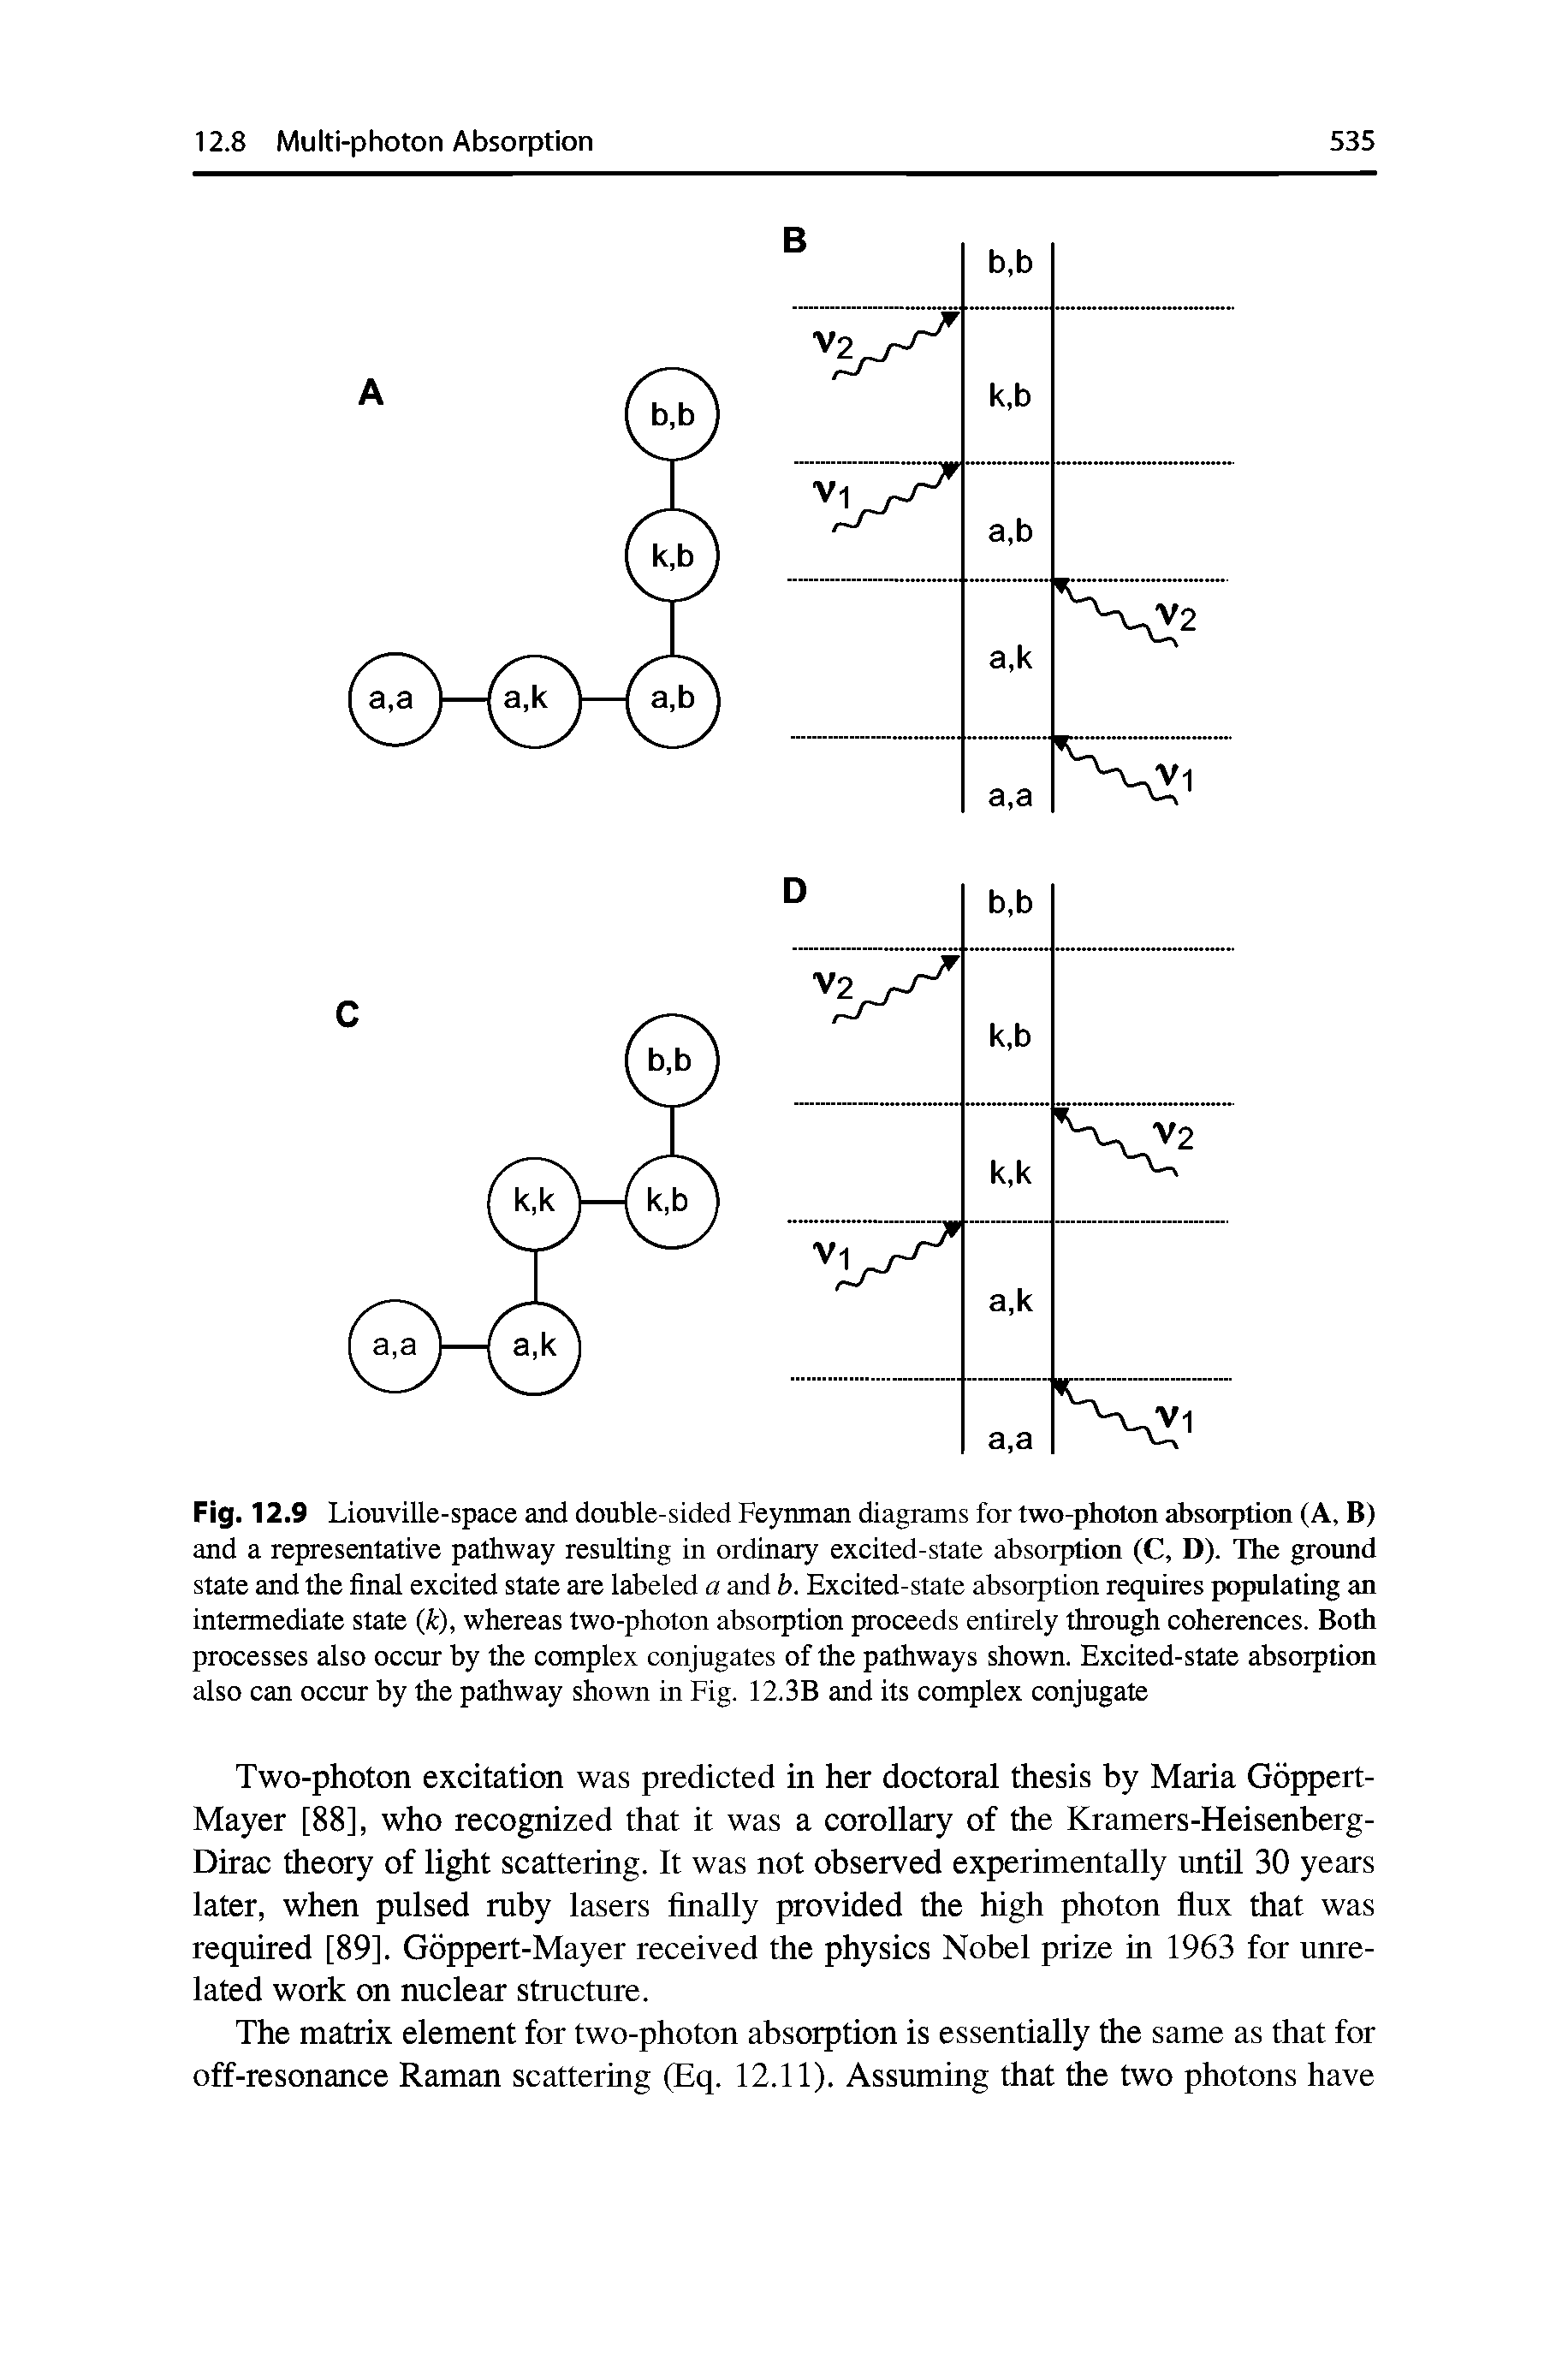 Fig. 12.9 Liouville-space and double-sided Feynman diagrams for two-photon absOTptirai (A, B) and a representative pathway resulting in ordinary excited-state absorption (C, D). The ground state and the final excited state are labeled a and b. Excited-state absorption requires populating an intermediate state (i), whereas two-photon absorption proceeds entirely through coherences. Both processes also occur by the complex conjugates of the pathways shown. Excited-state absorption also can occur by the pathway shown in Fig. 12.3B and its complex conjugate...